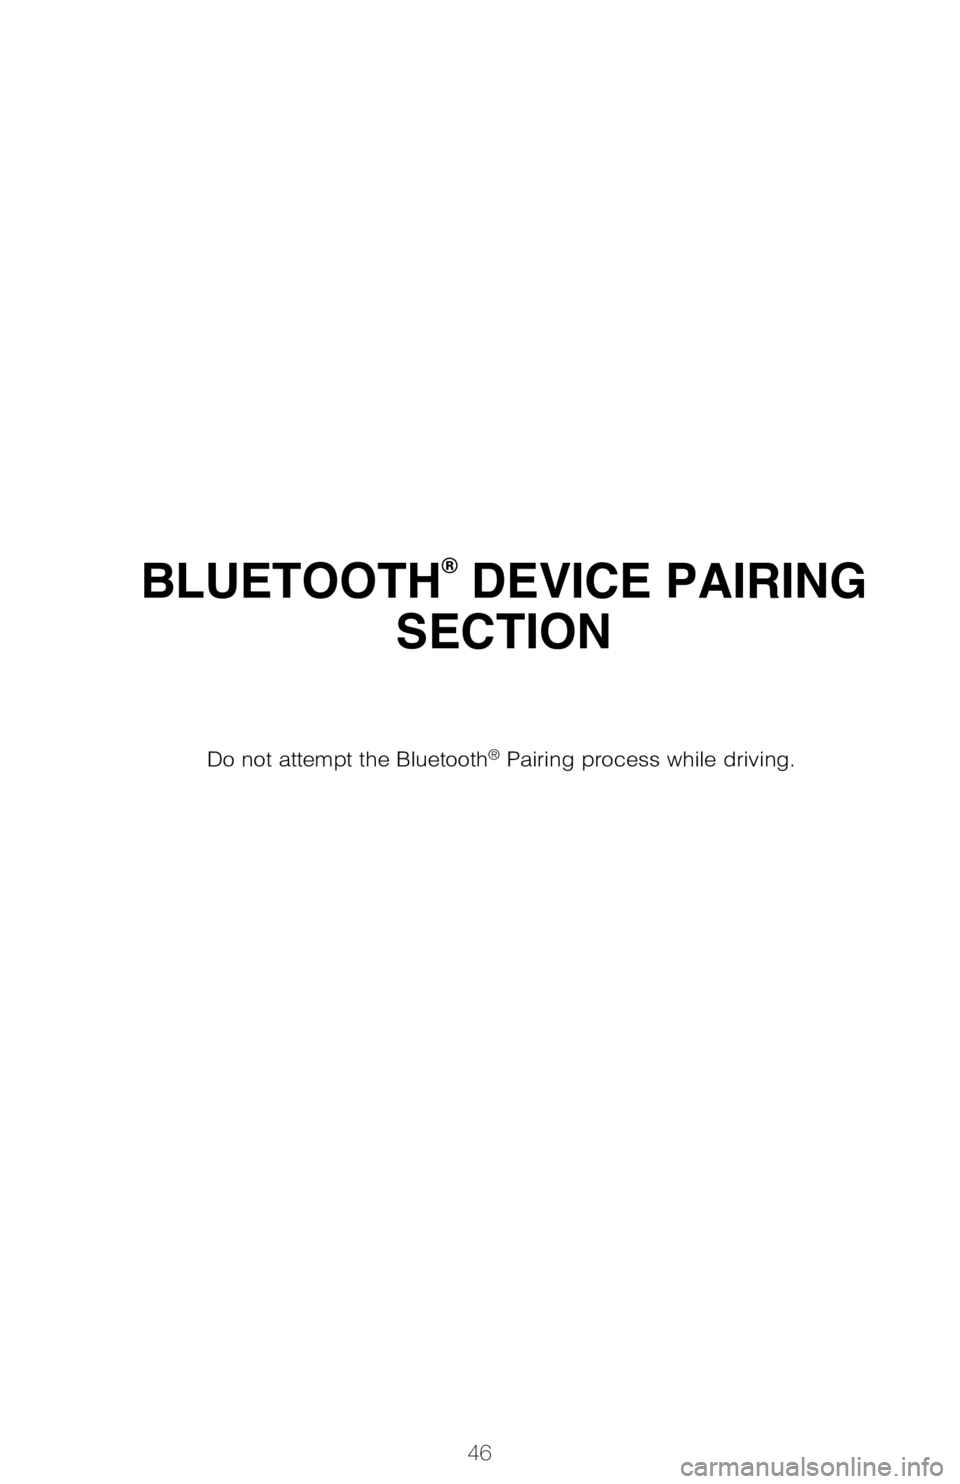 TOYOTA TUNDRA 2020  Owners Manual (in English) 46
BLUETOOTH® DEVICE PAIRING 
SECTION
Do not attempt the Bluetooth® Pairing process while driving. 